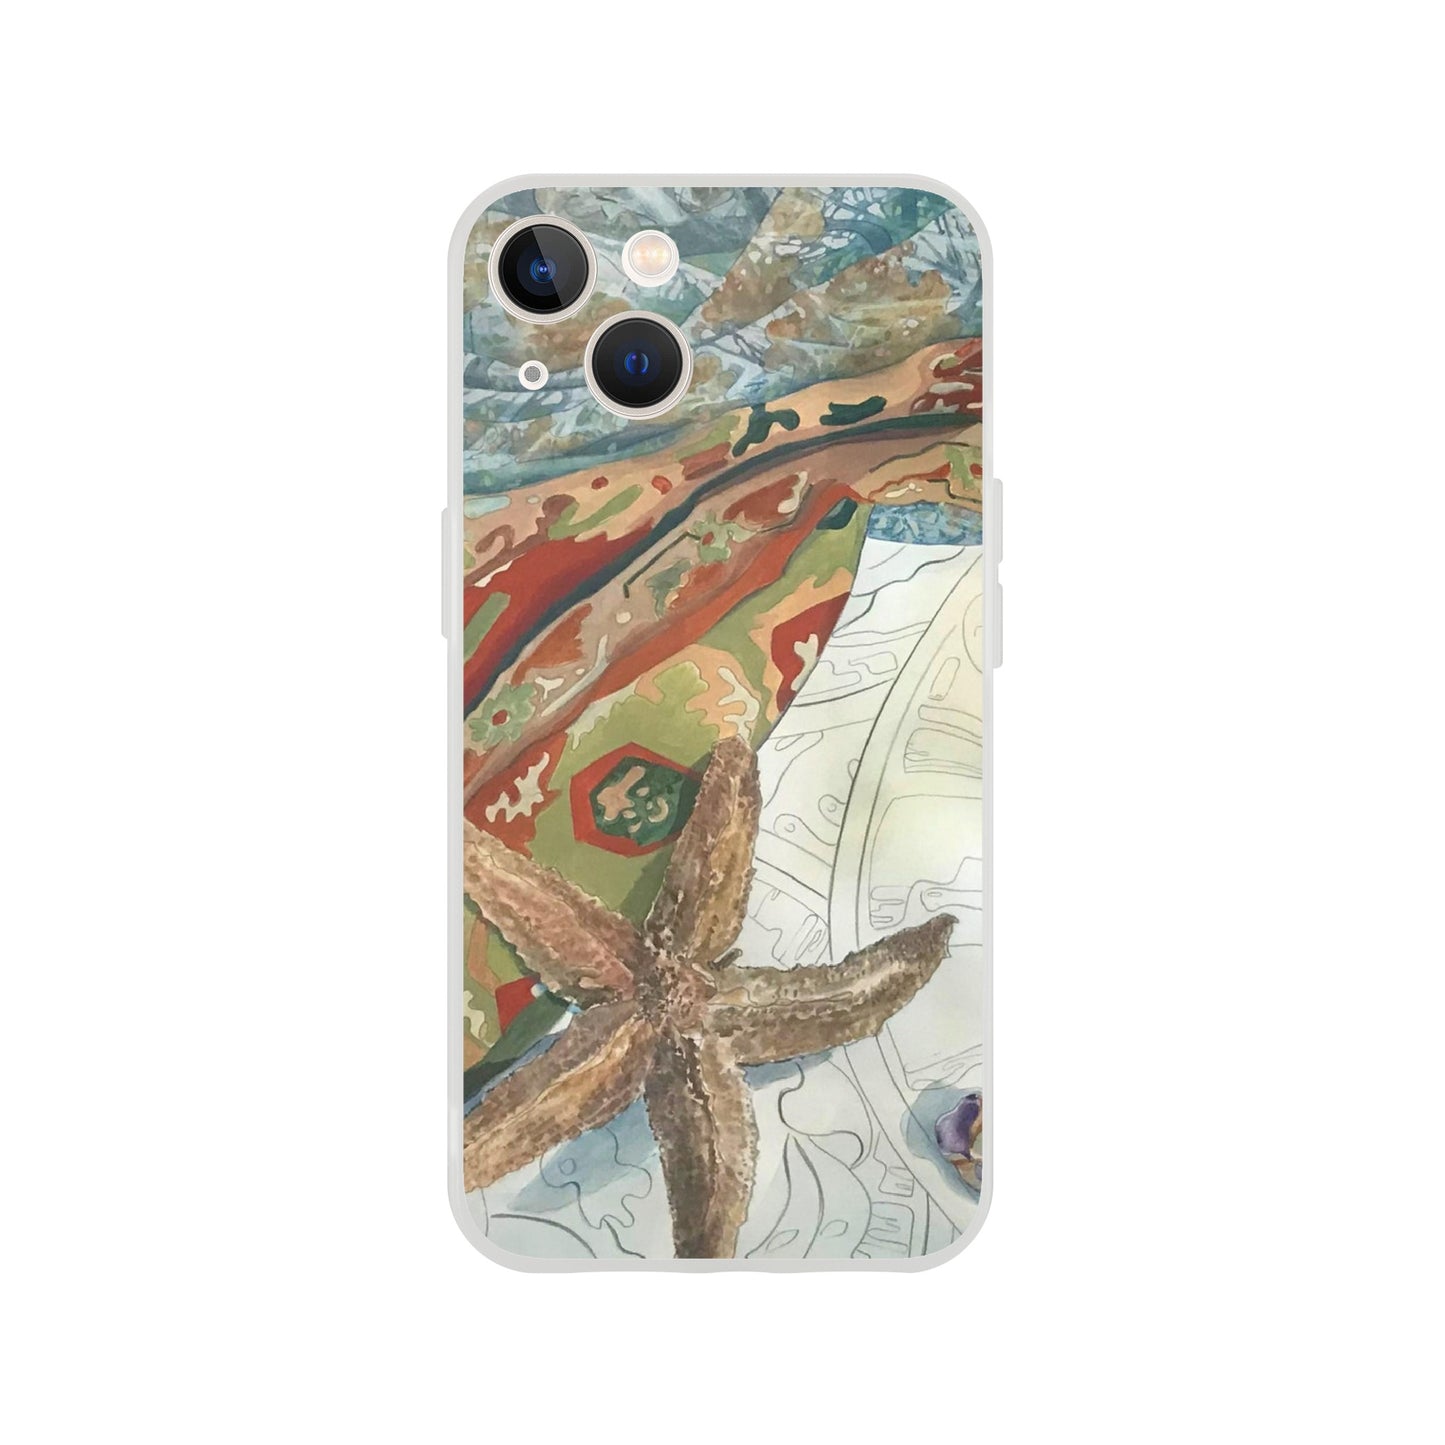 "Shells" Flexi Phone Case for Iphone or Samsung by Barbara Cleary Designs